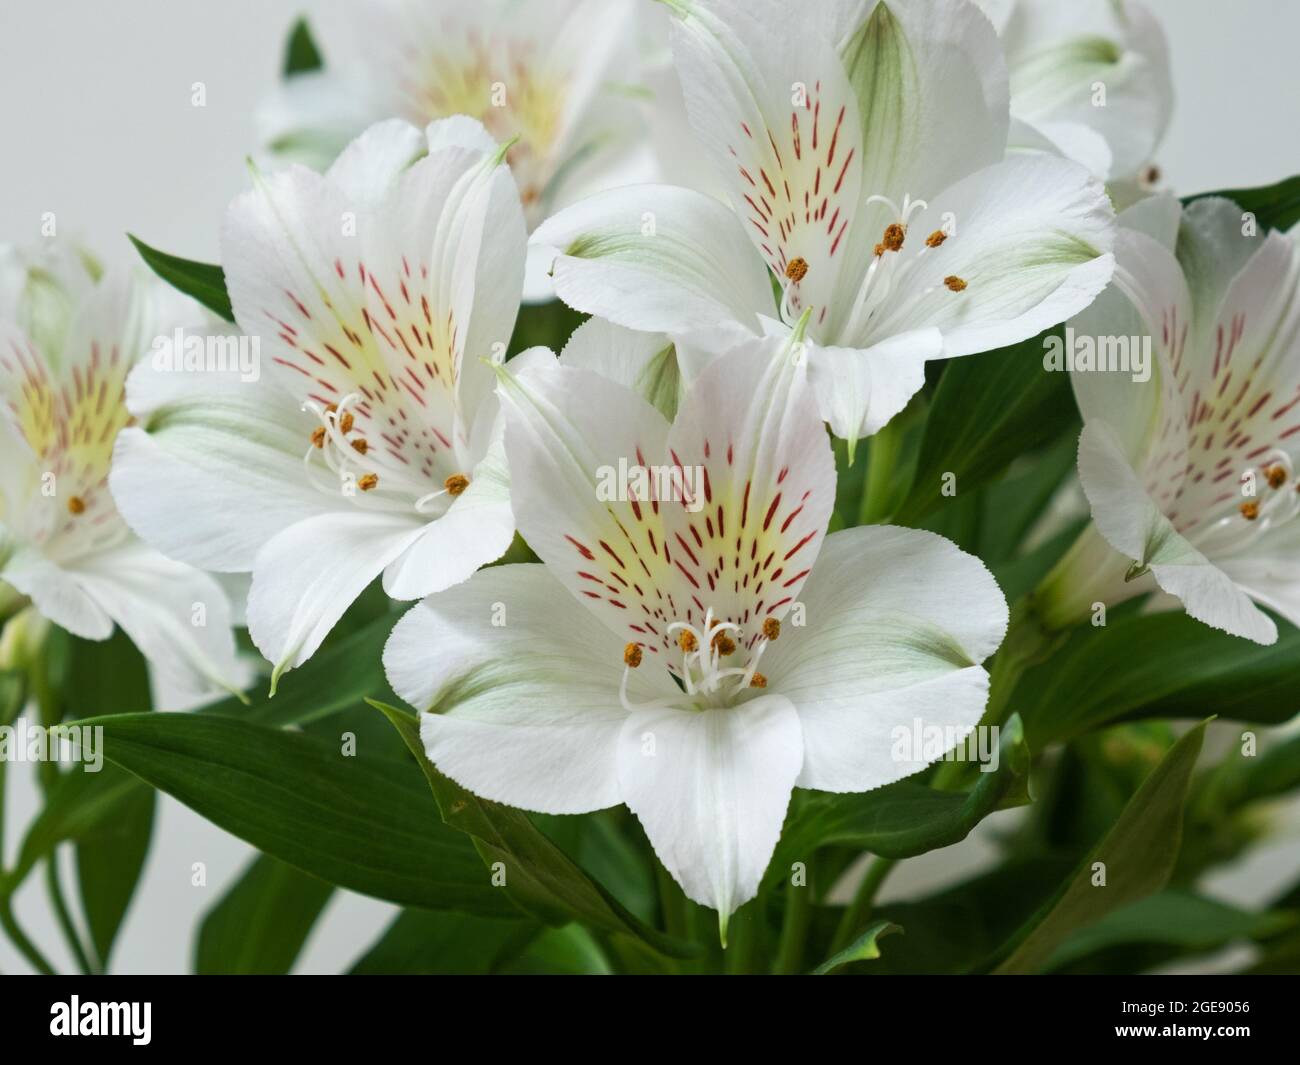 A display of white Alstroemeria aurea flowers ( also known as the Peruvian Lily ) native to the Americas Stock Photo